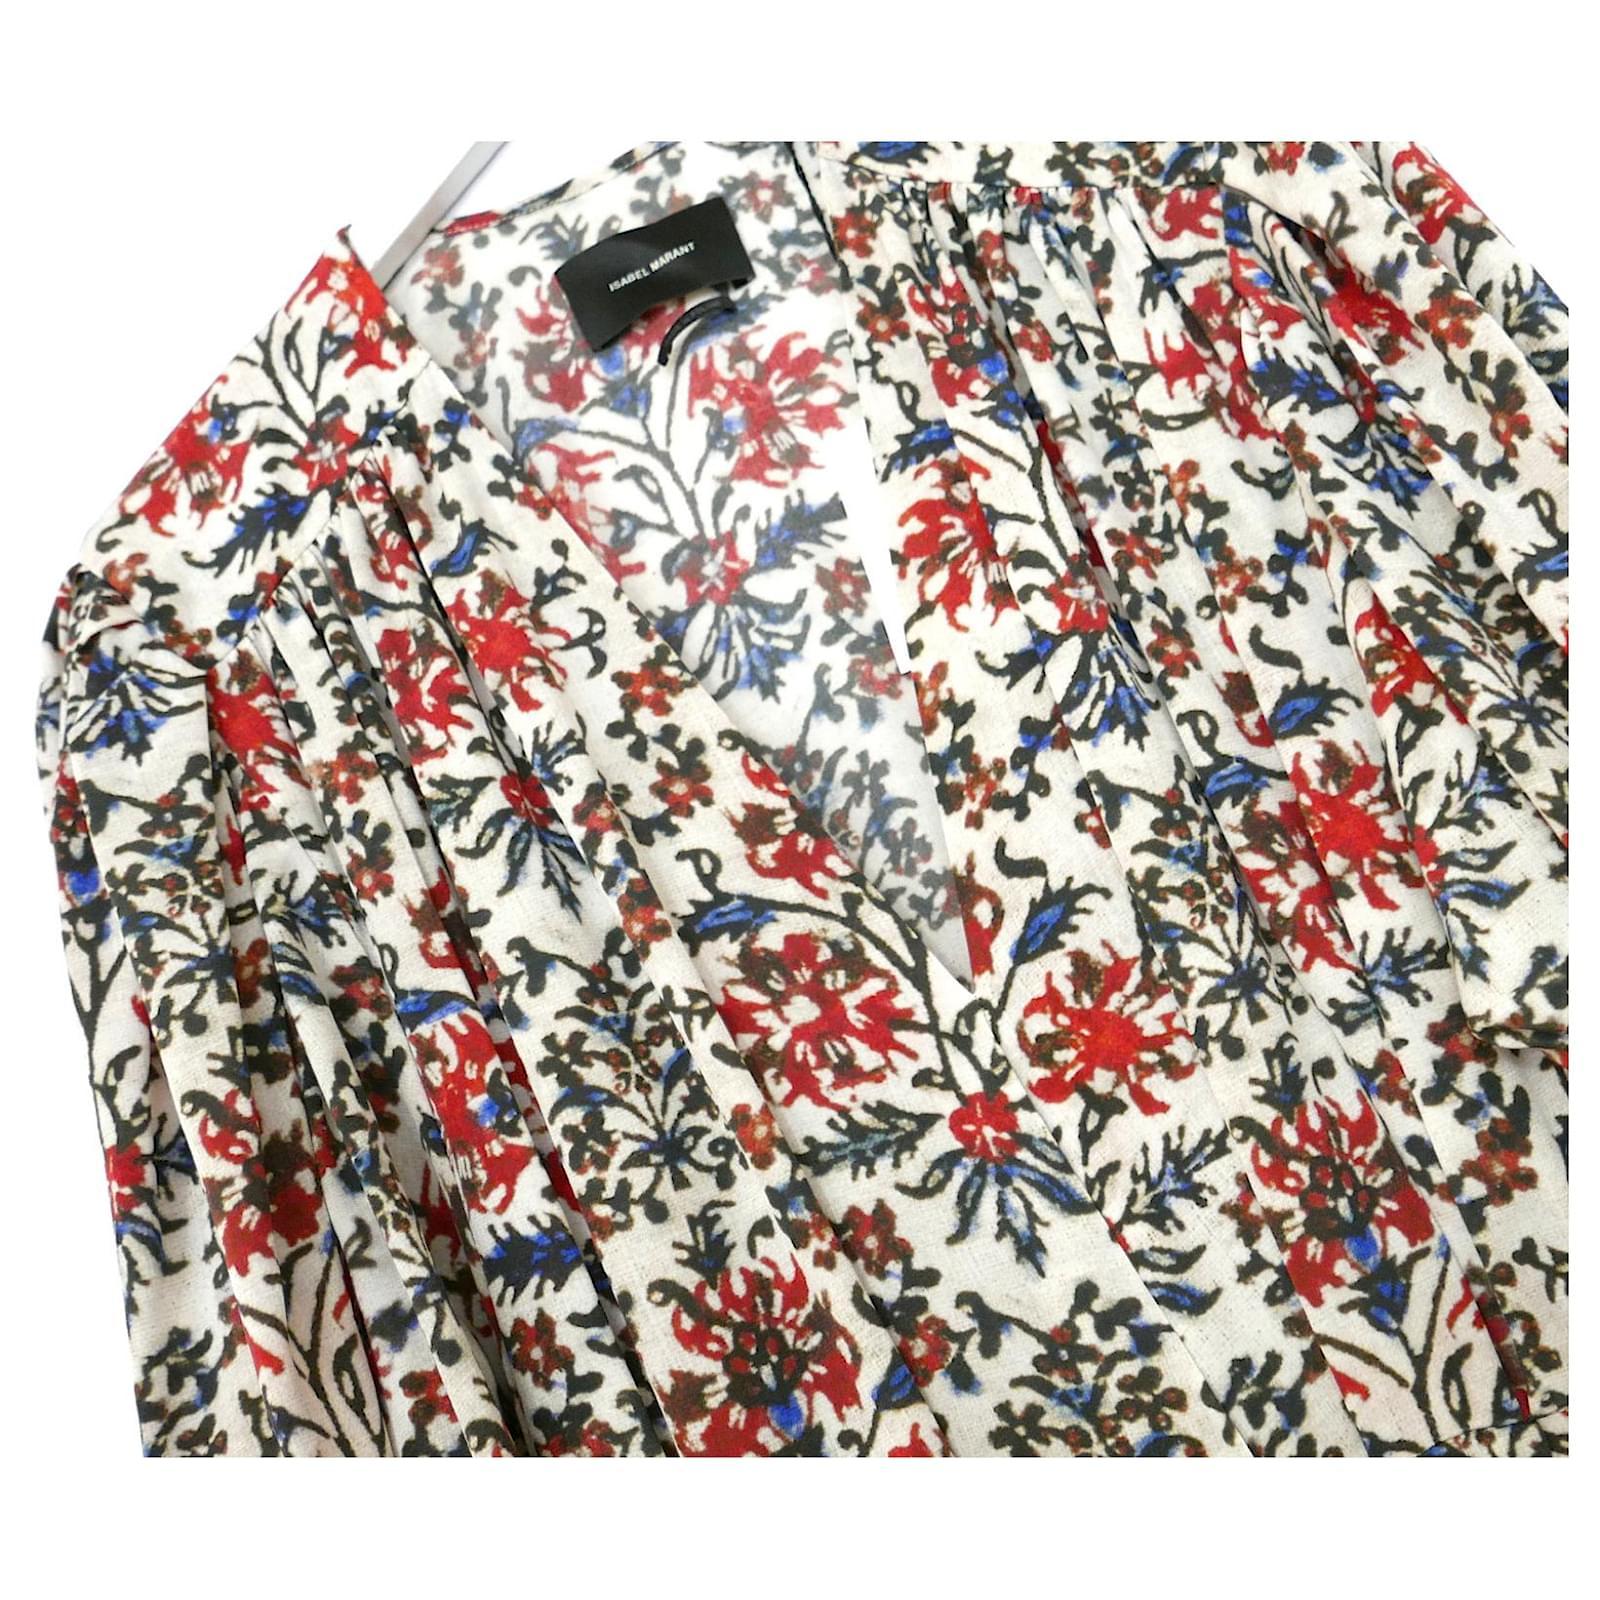 Gorgeous Isabel Marant Blaine floral stretch-silk dress. Bought for £1250 and new with tag. Made from red hued floral stretch silk with elastane. 
It has Marant’s signature cool girl, 70s tinged vibe with voluminous batwing ruched cuff sleeves,